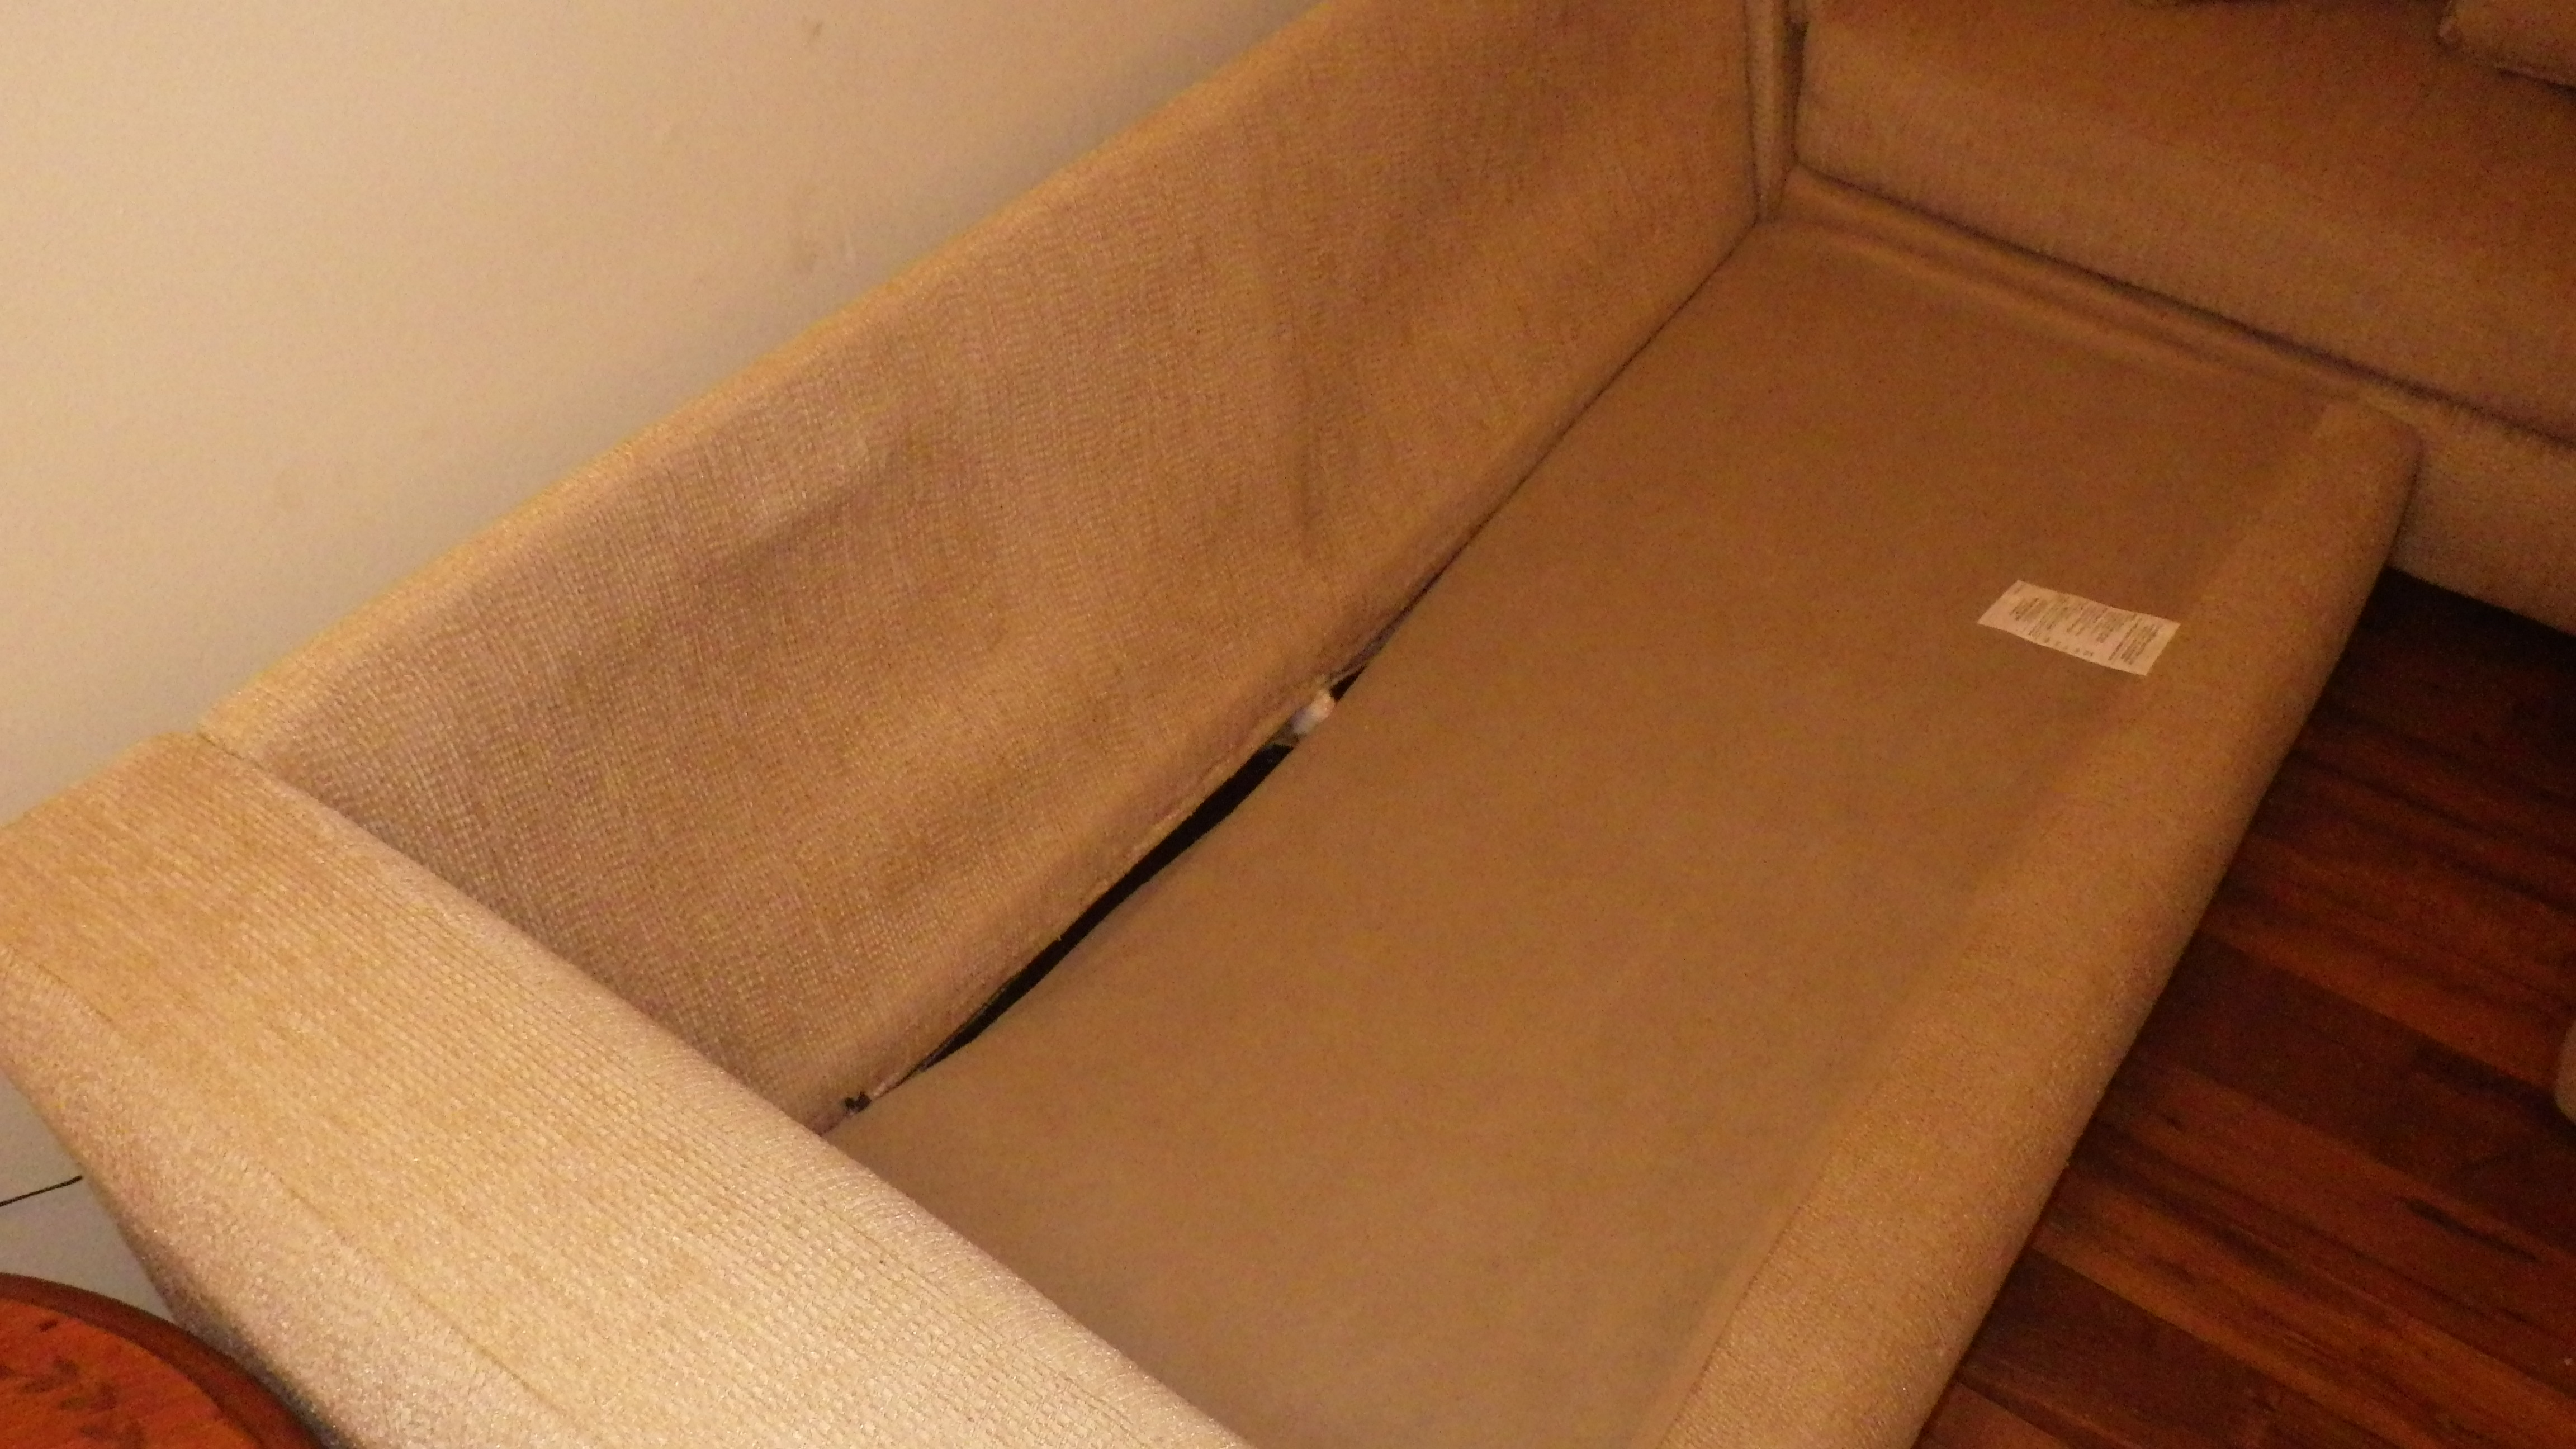 The couch they sold me with the damage.